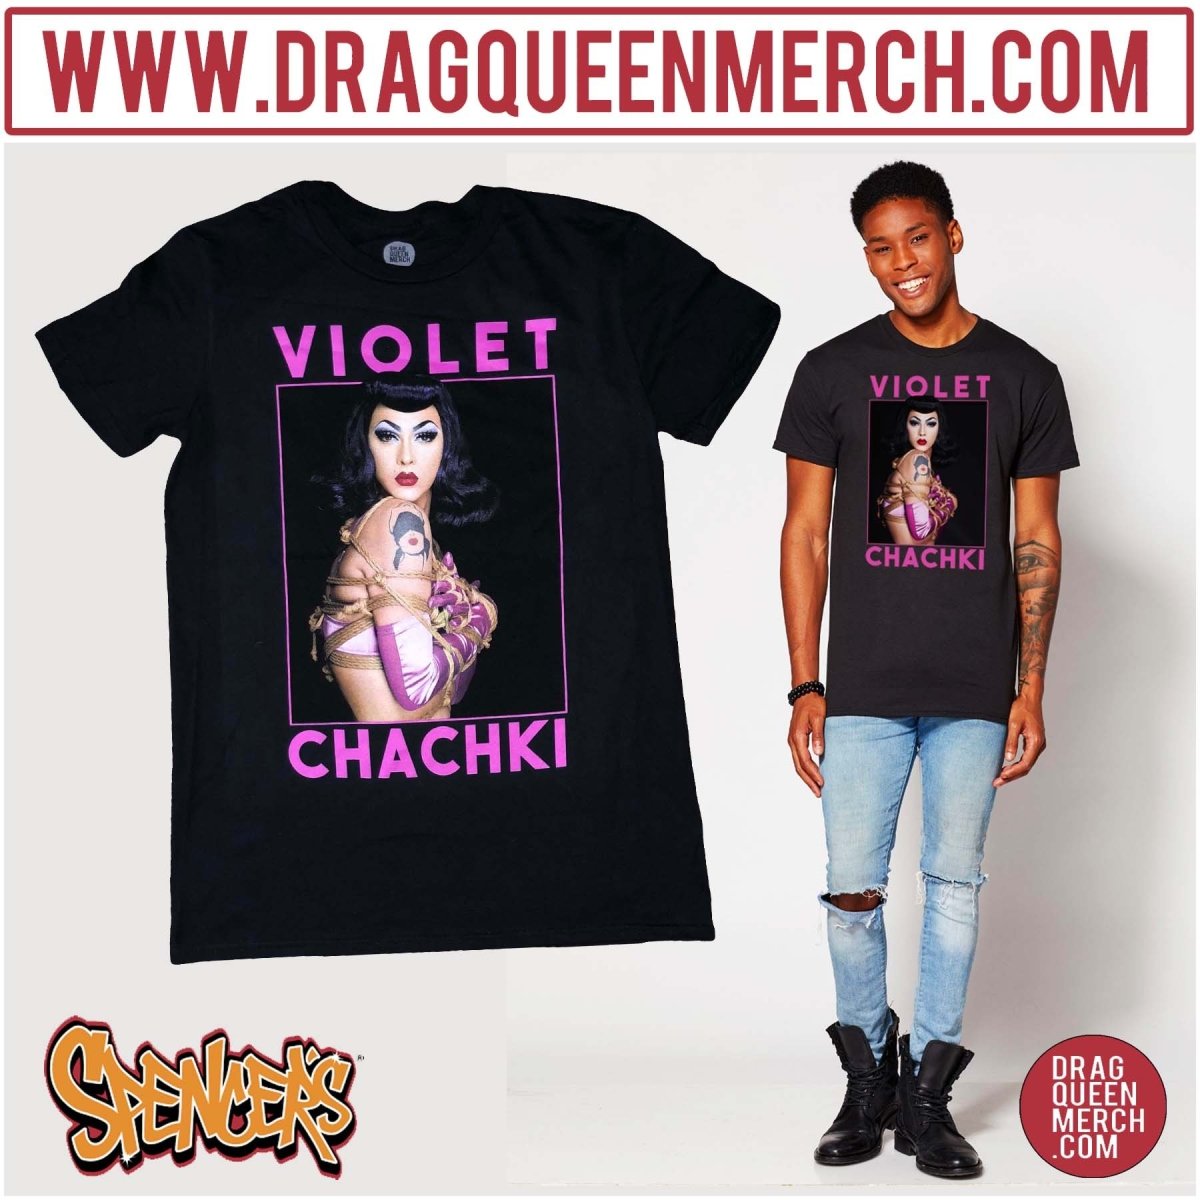 VIOLET CHACHKI "ALL TIED UP" T-Shirt